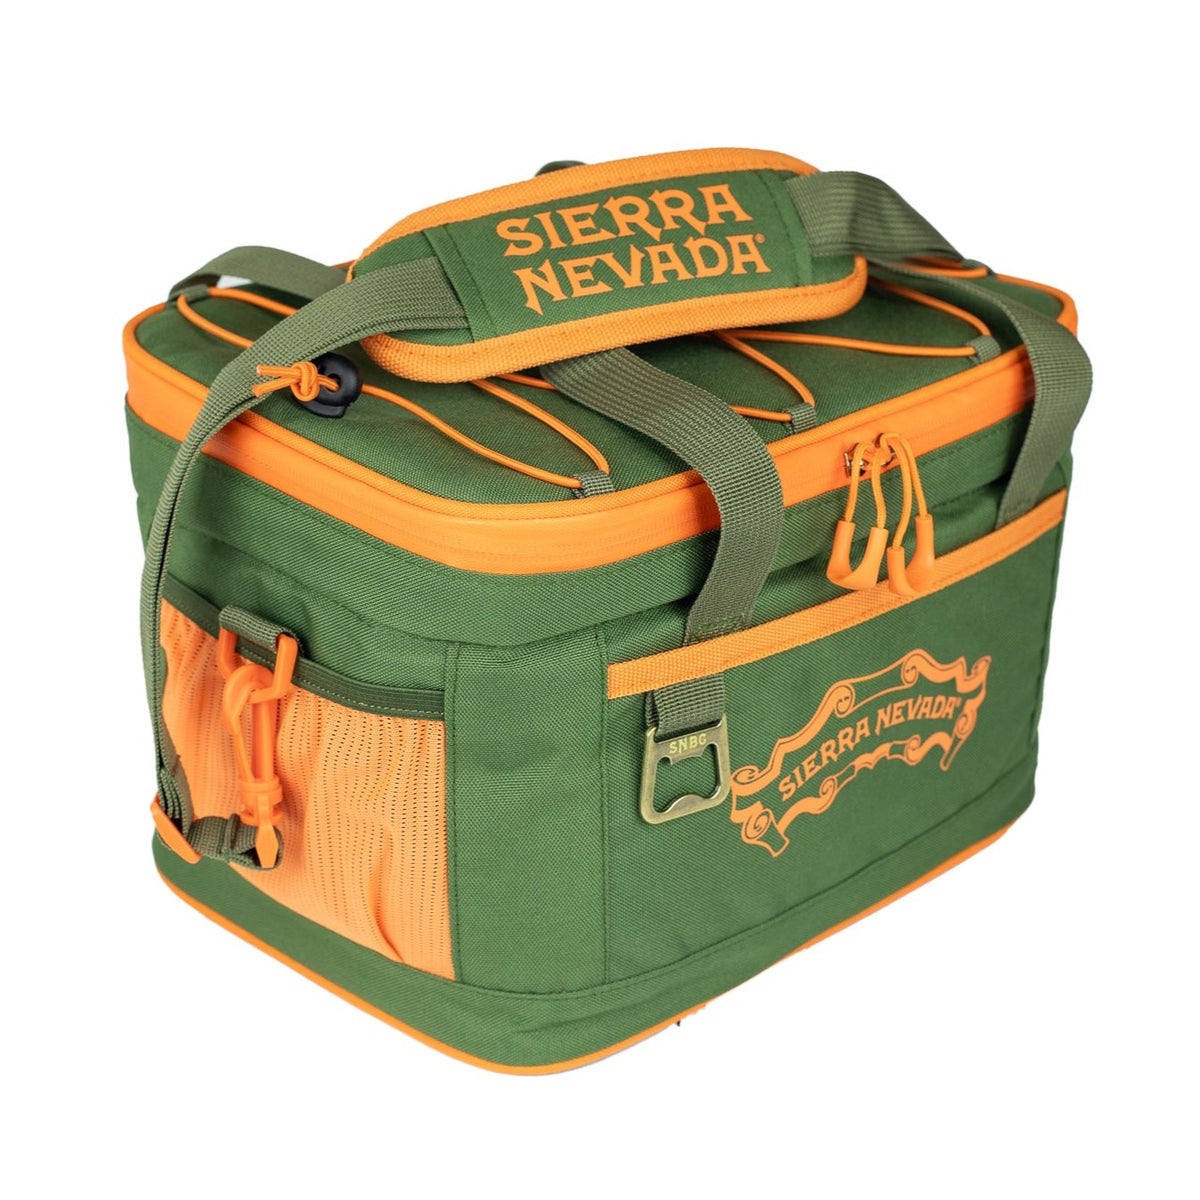 Sierra Nevada Brewing Co. 12 Can Soft Sided Cooler - strap detail view